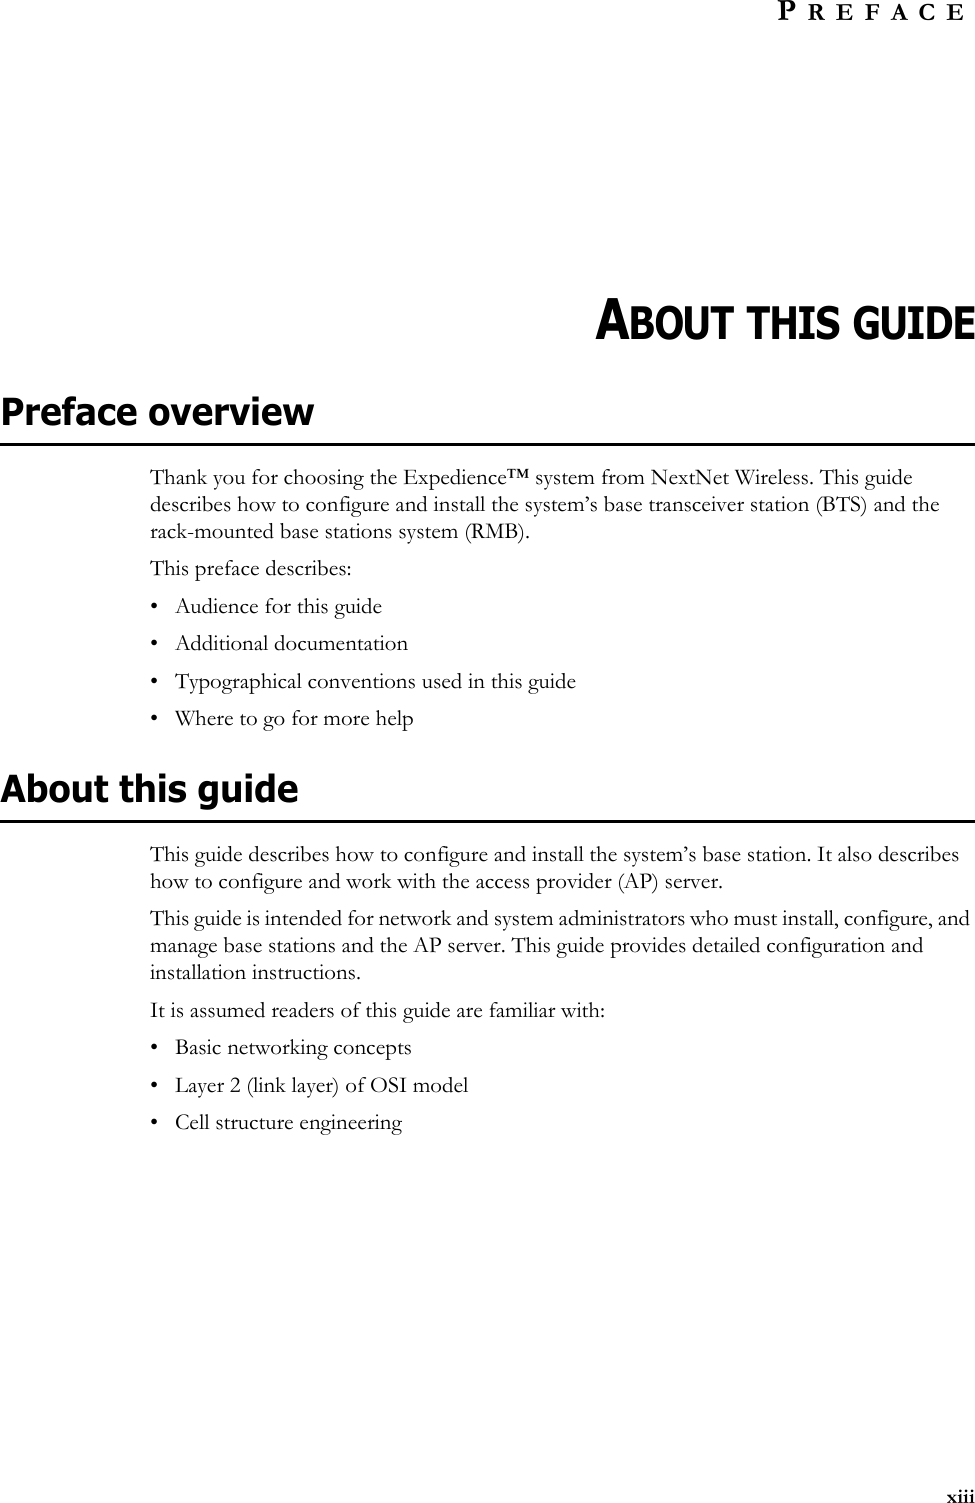 xiiiPREFACEABOUT THIS GUIDEPreface overviewThank you for choosing the Expedience™ system from NextNet Wireless. This guide describes how to configure and install the system’s base transceiver station (BTS) and the rack-mounted base stations system (RMB).This preface describes:• Audience for this guide• Additional documentation• Typographical conventions used in this guide• Where to go for more helpAbout this guideThis guide describes how to configure and install the system’s base station. It also describes how to configure and work with the access provider (AP) server.This guide is intended for network and system administrators who must install, configure, and manage base stations and the AP server. This guide provides detailed configuration and installation instructions.It is assumed readers of this guide are familiar with:• Basic networking concepts• Layer 2 (link layer) of OSI model • Cell structure engineering